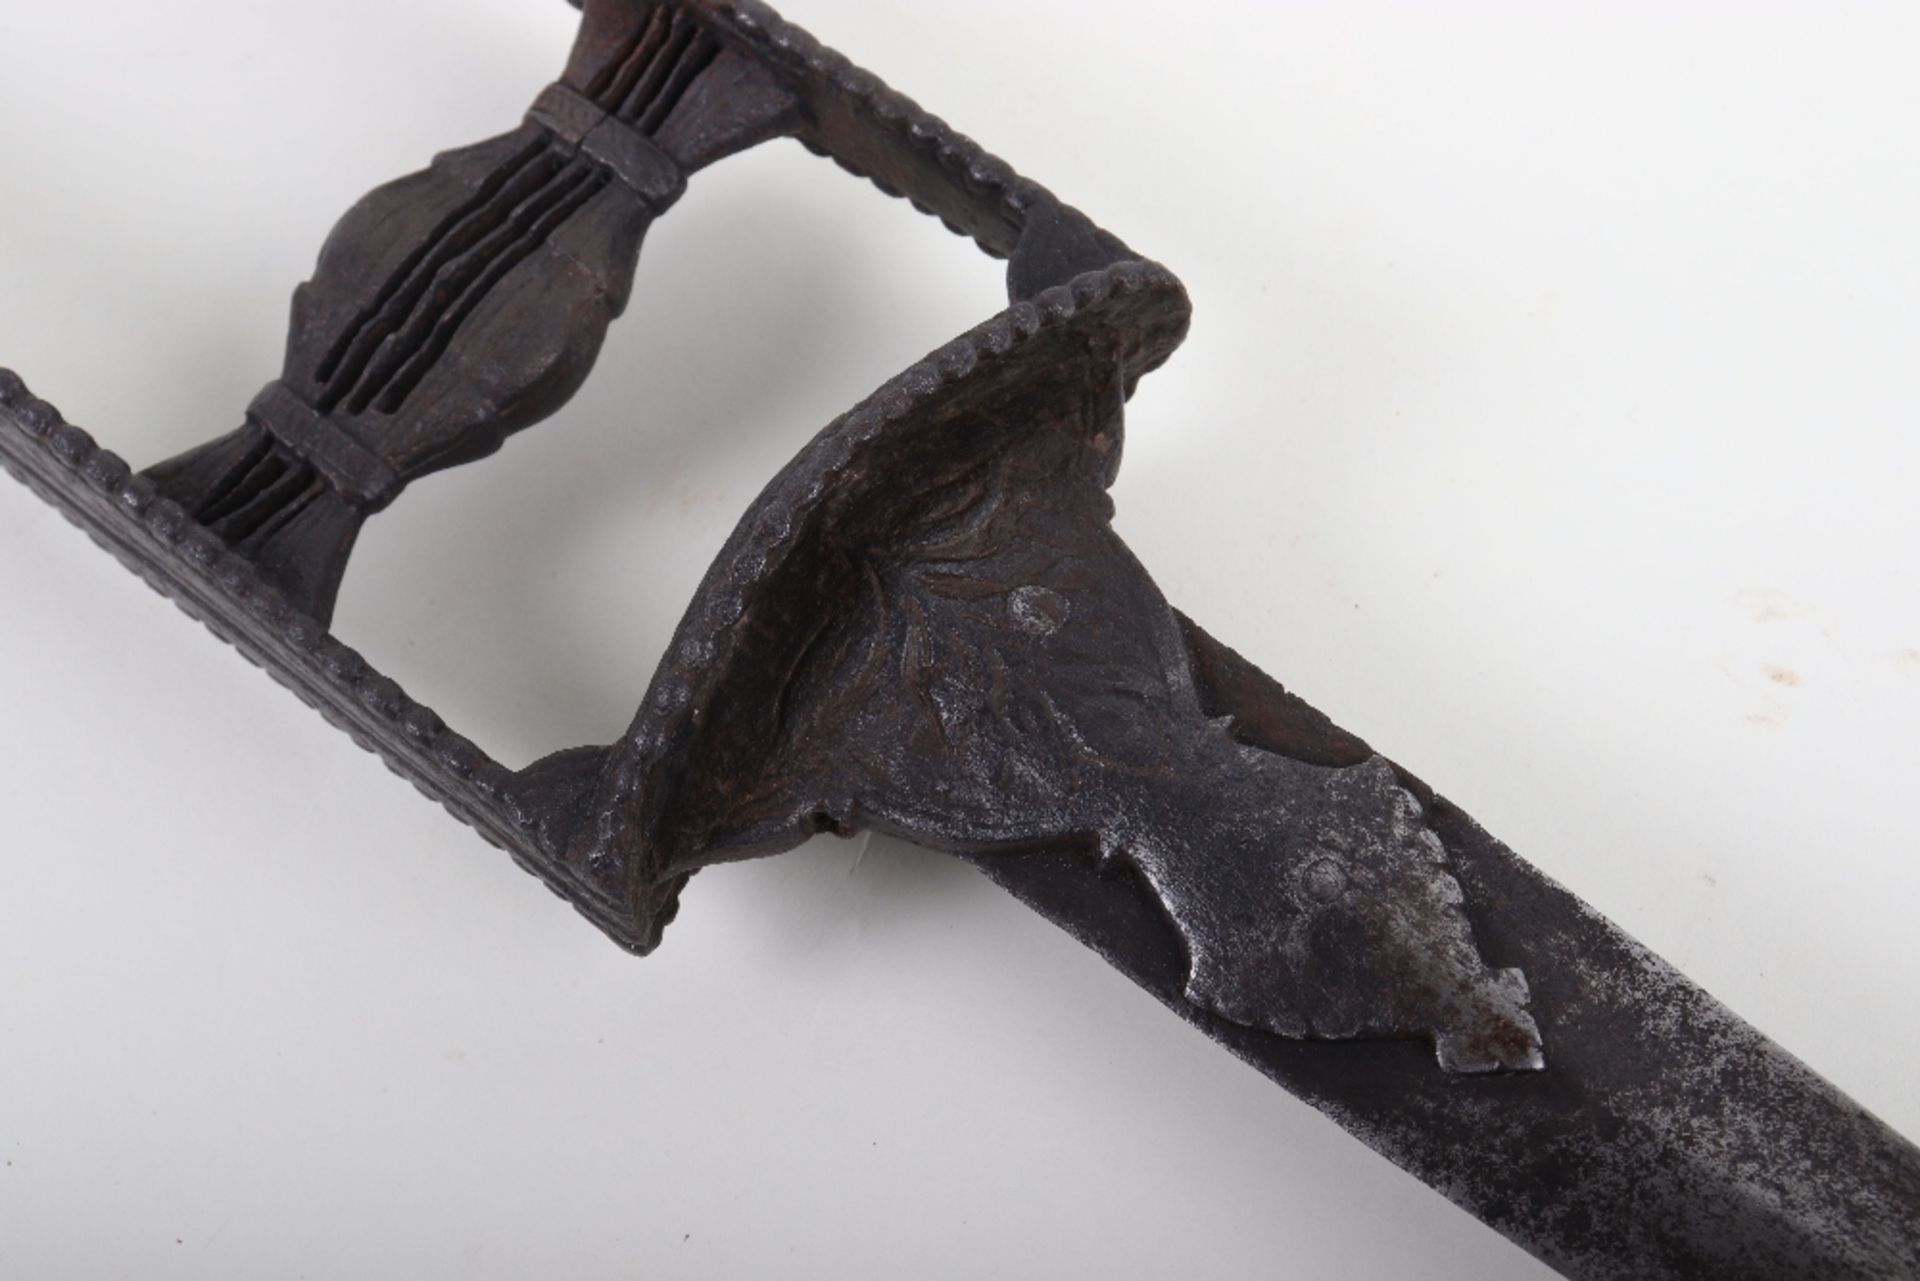 Indian Iron Katar of Tanjore Armoury Type, 17th Century - Image 4 of 10